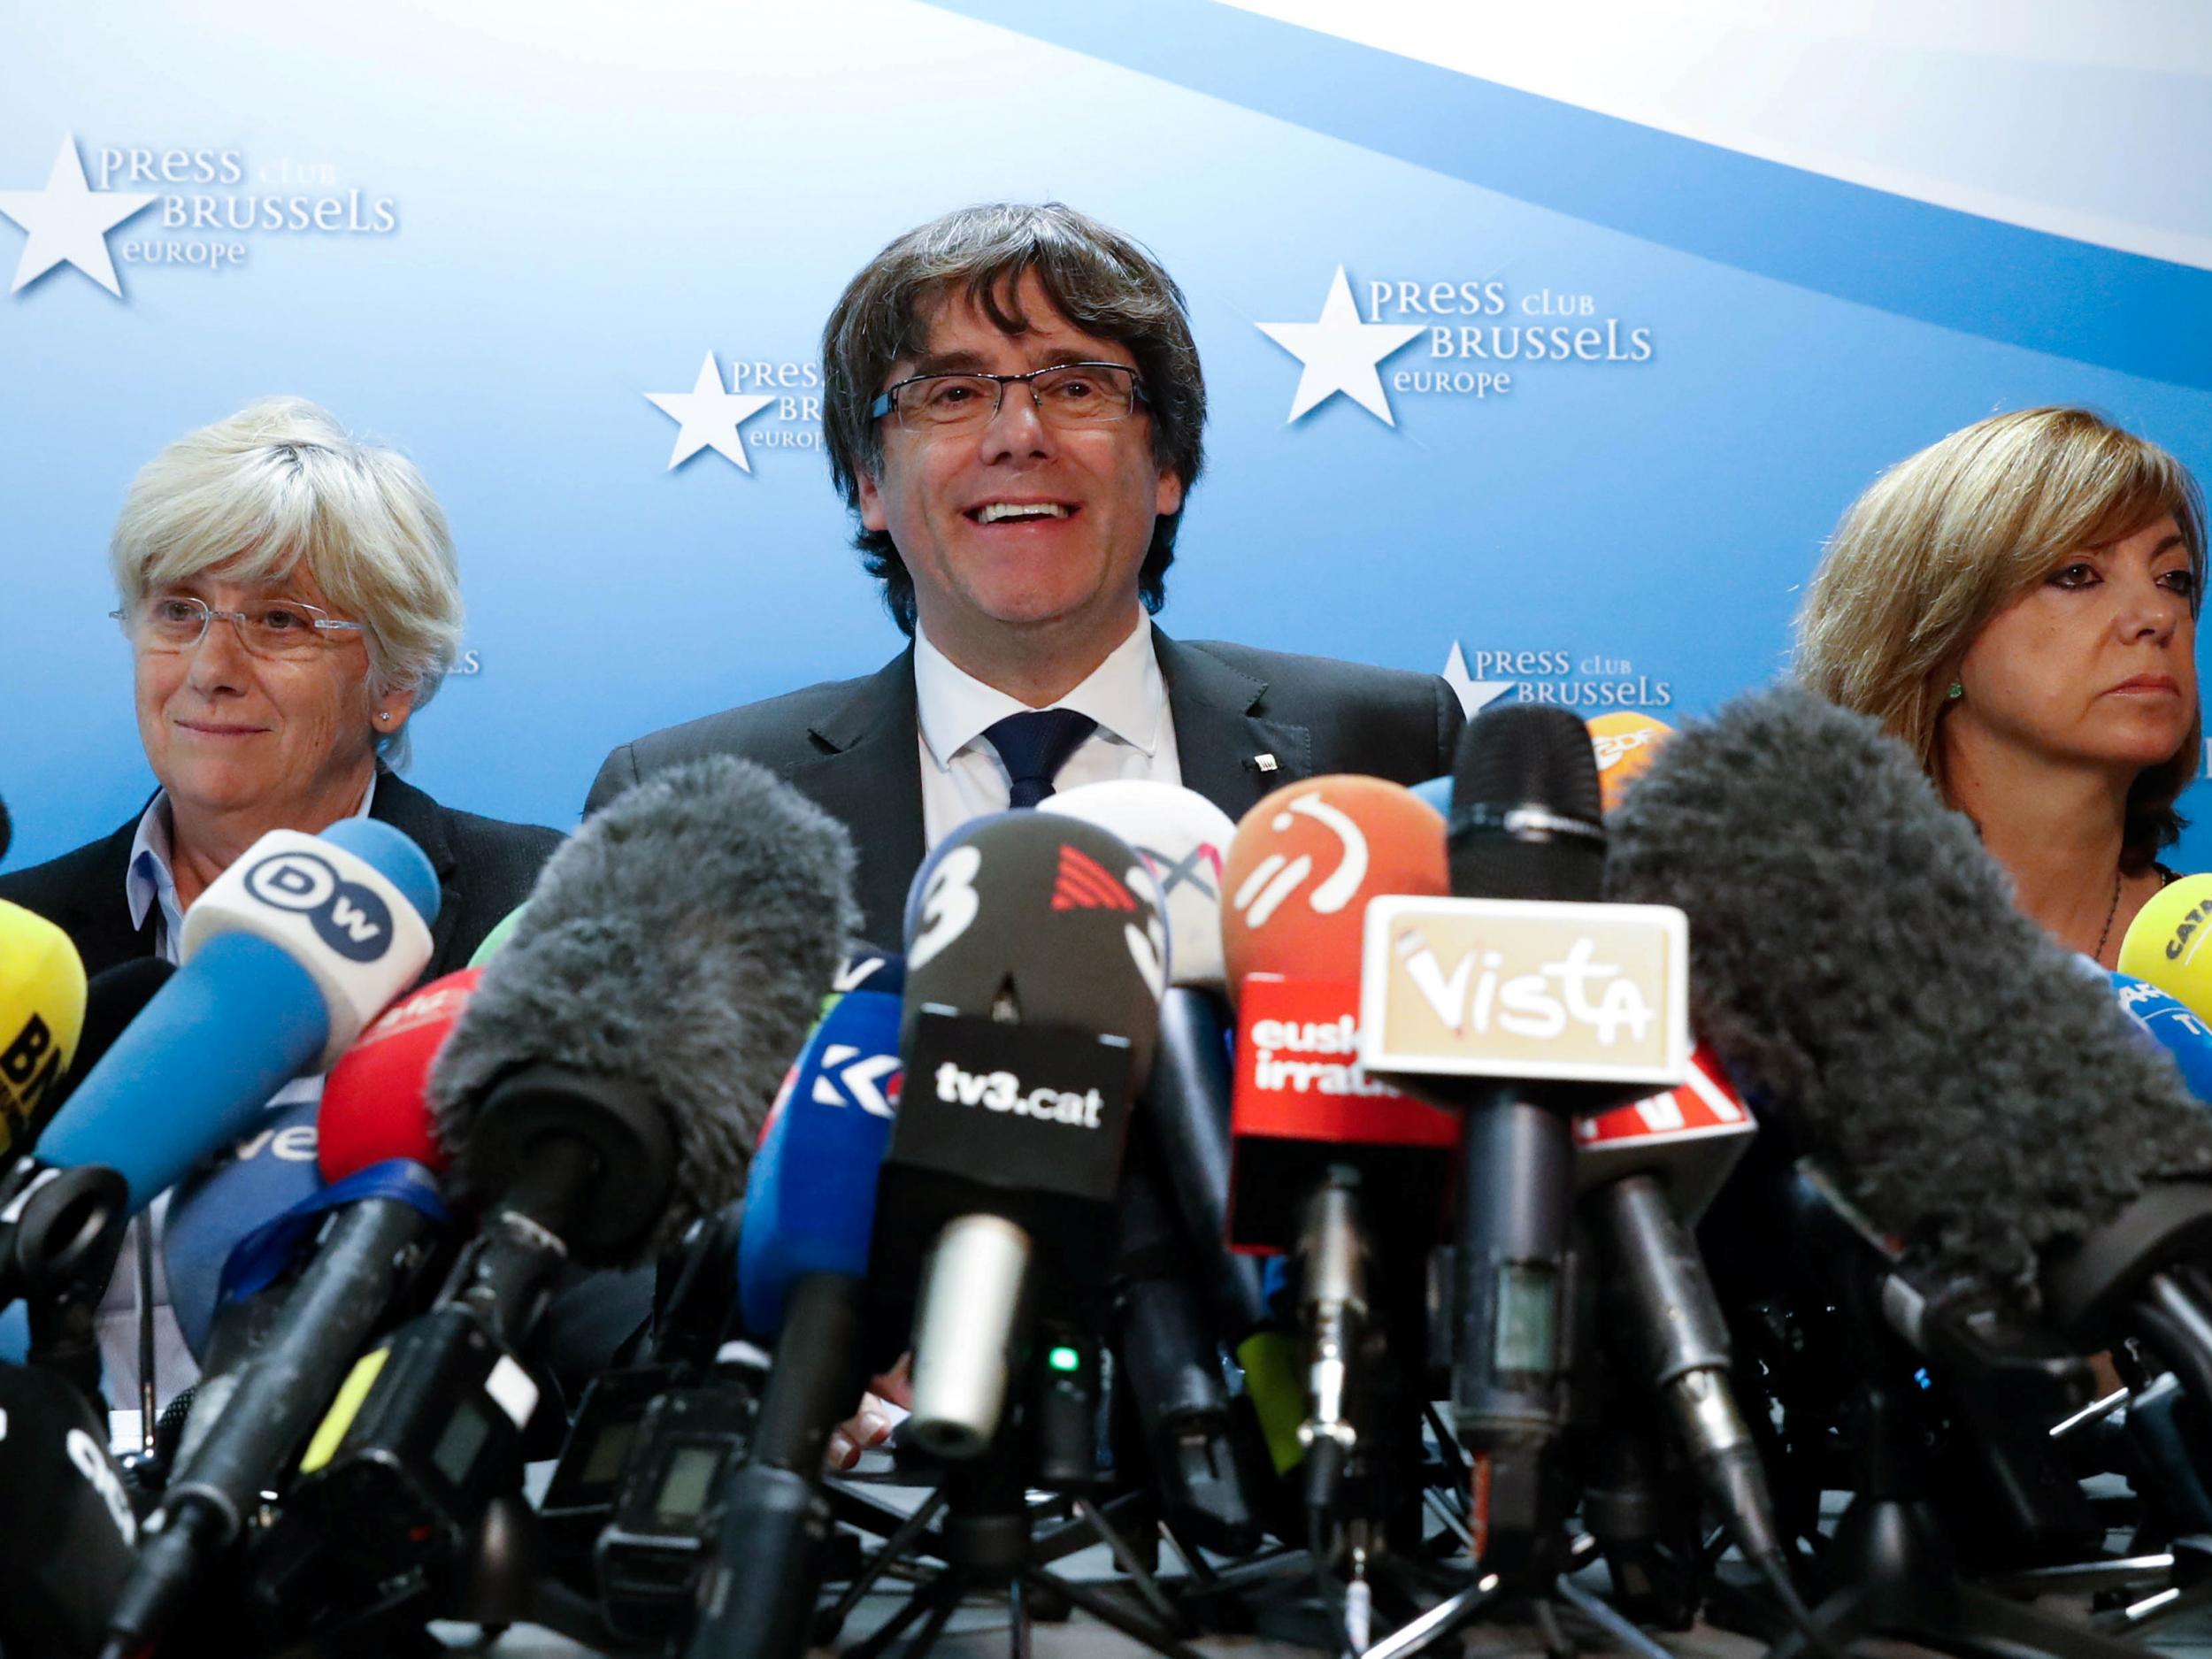 Sacked Catalan leader Carles Puigdemont and former member of the Government of Catalonia Clara Ponsati attend a news conference at the Press Club Brussels Europe in Brussels, Belgium